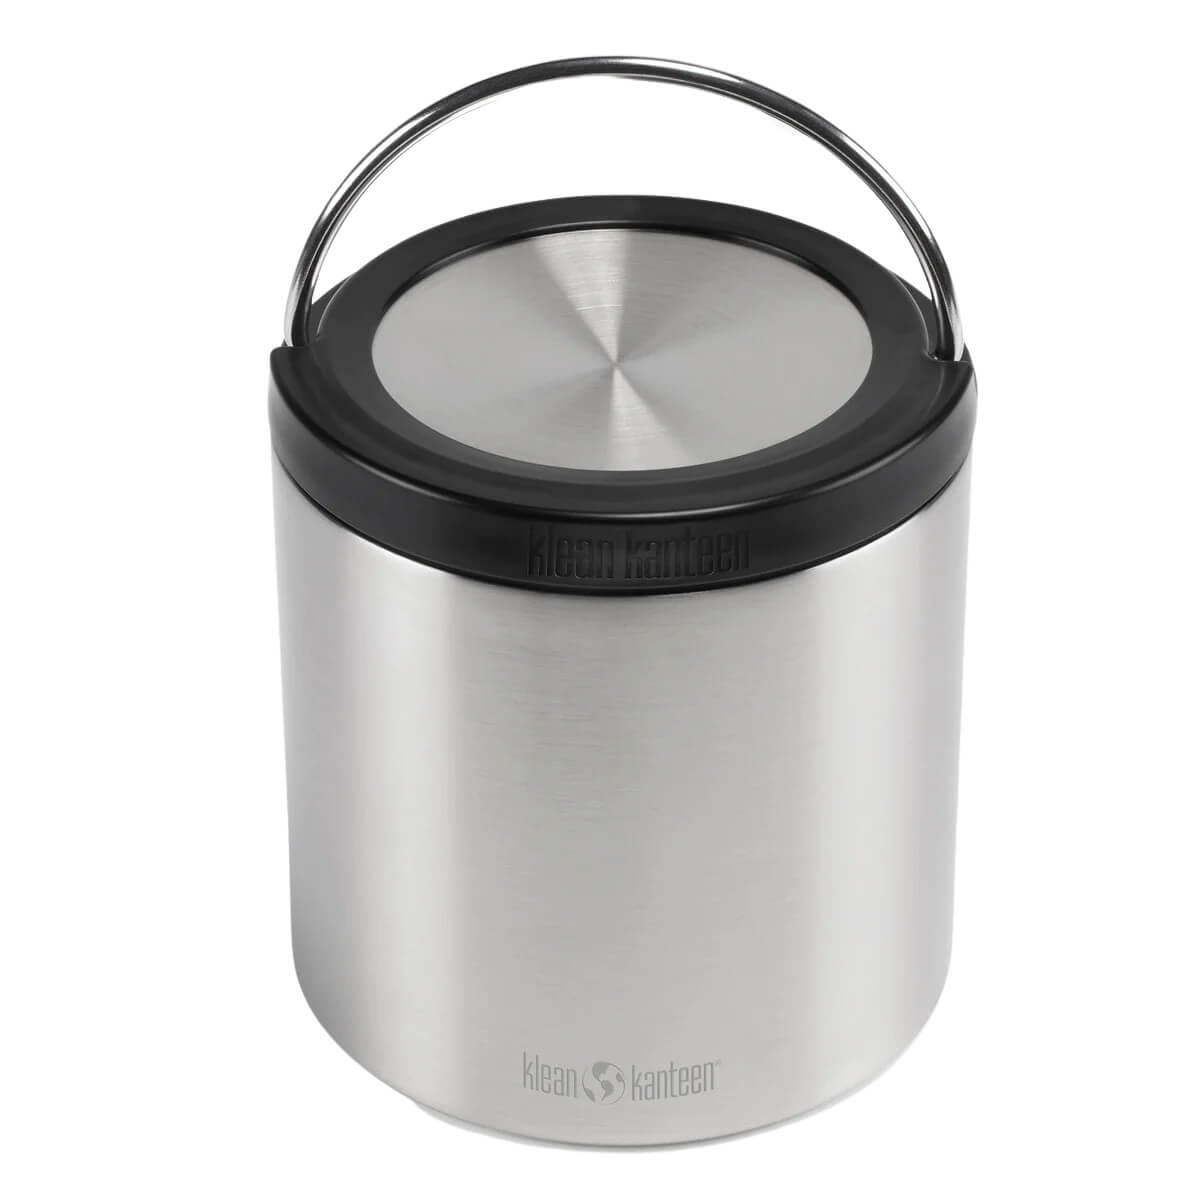 Klean Kanteen Insulated Food Canister 32oz (946ml)